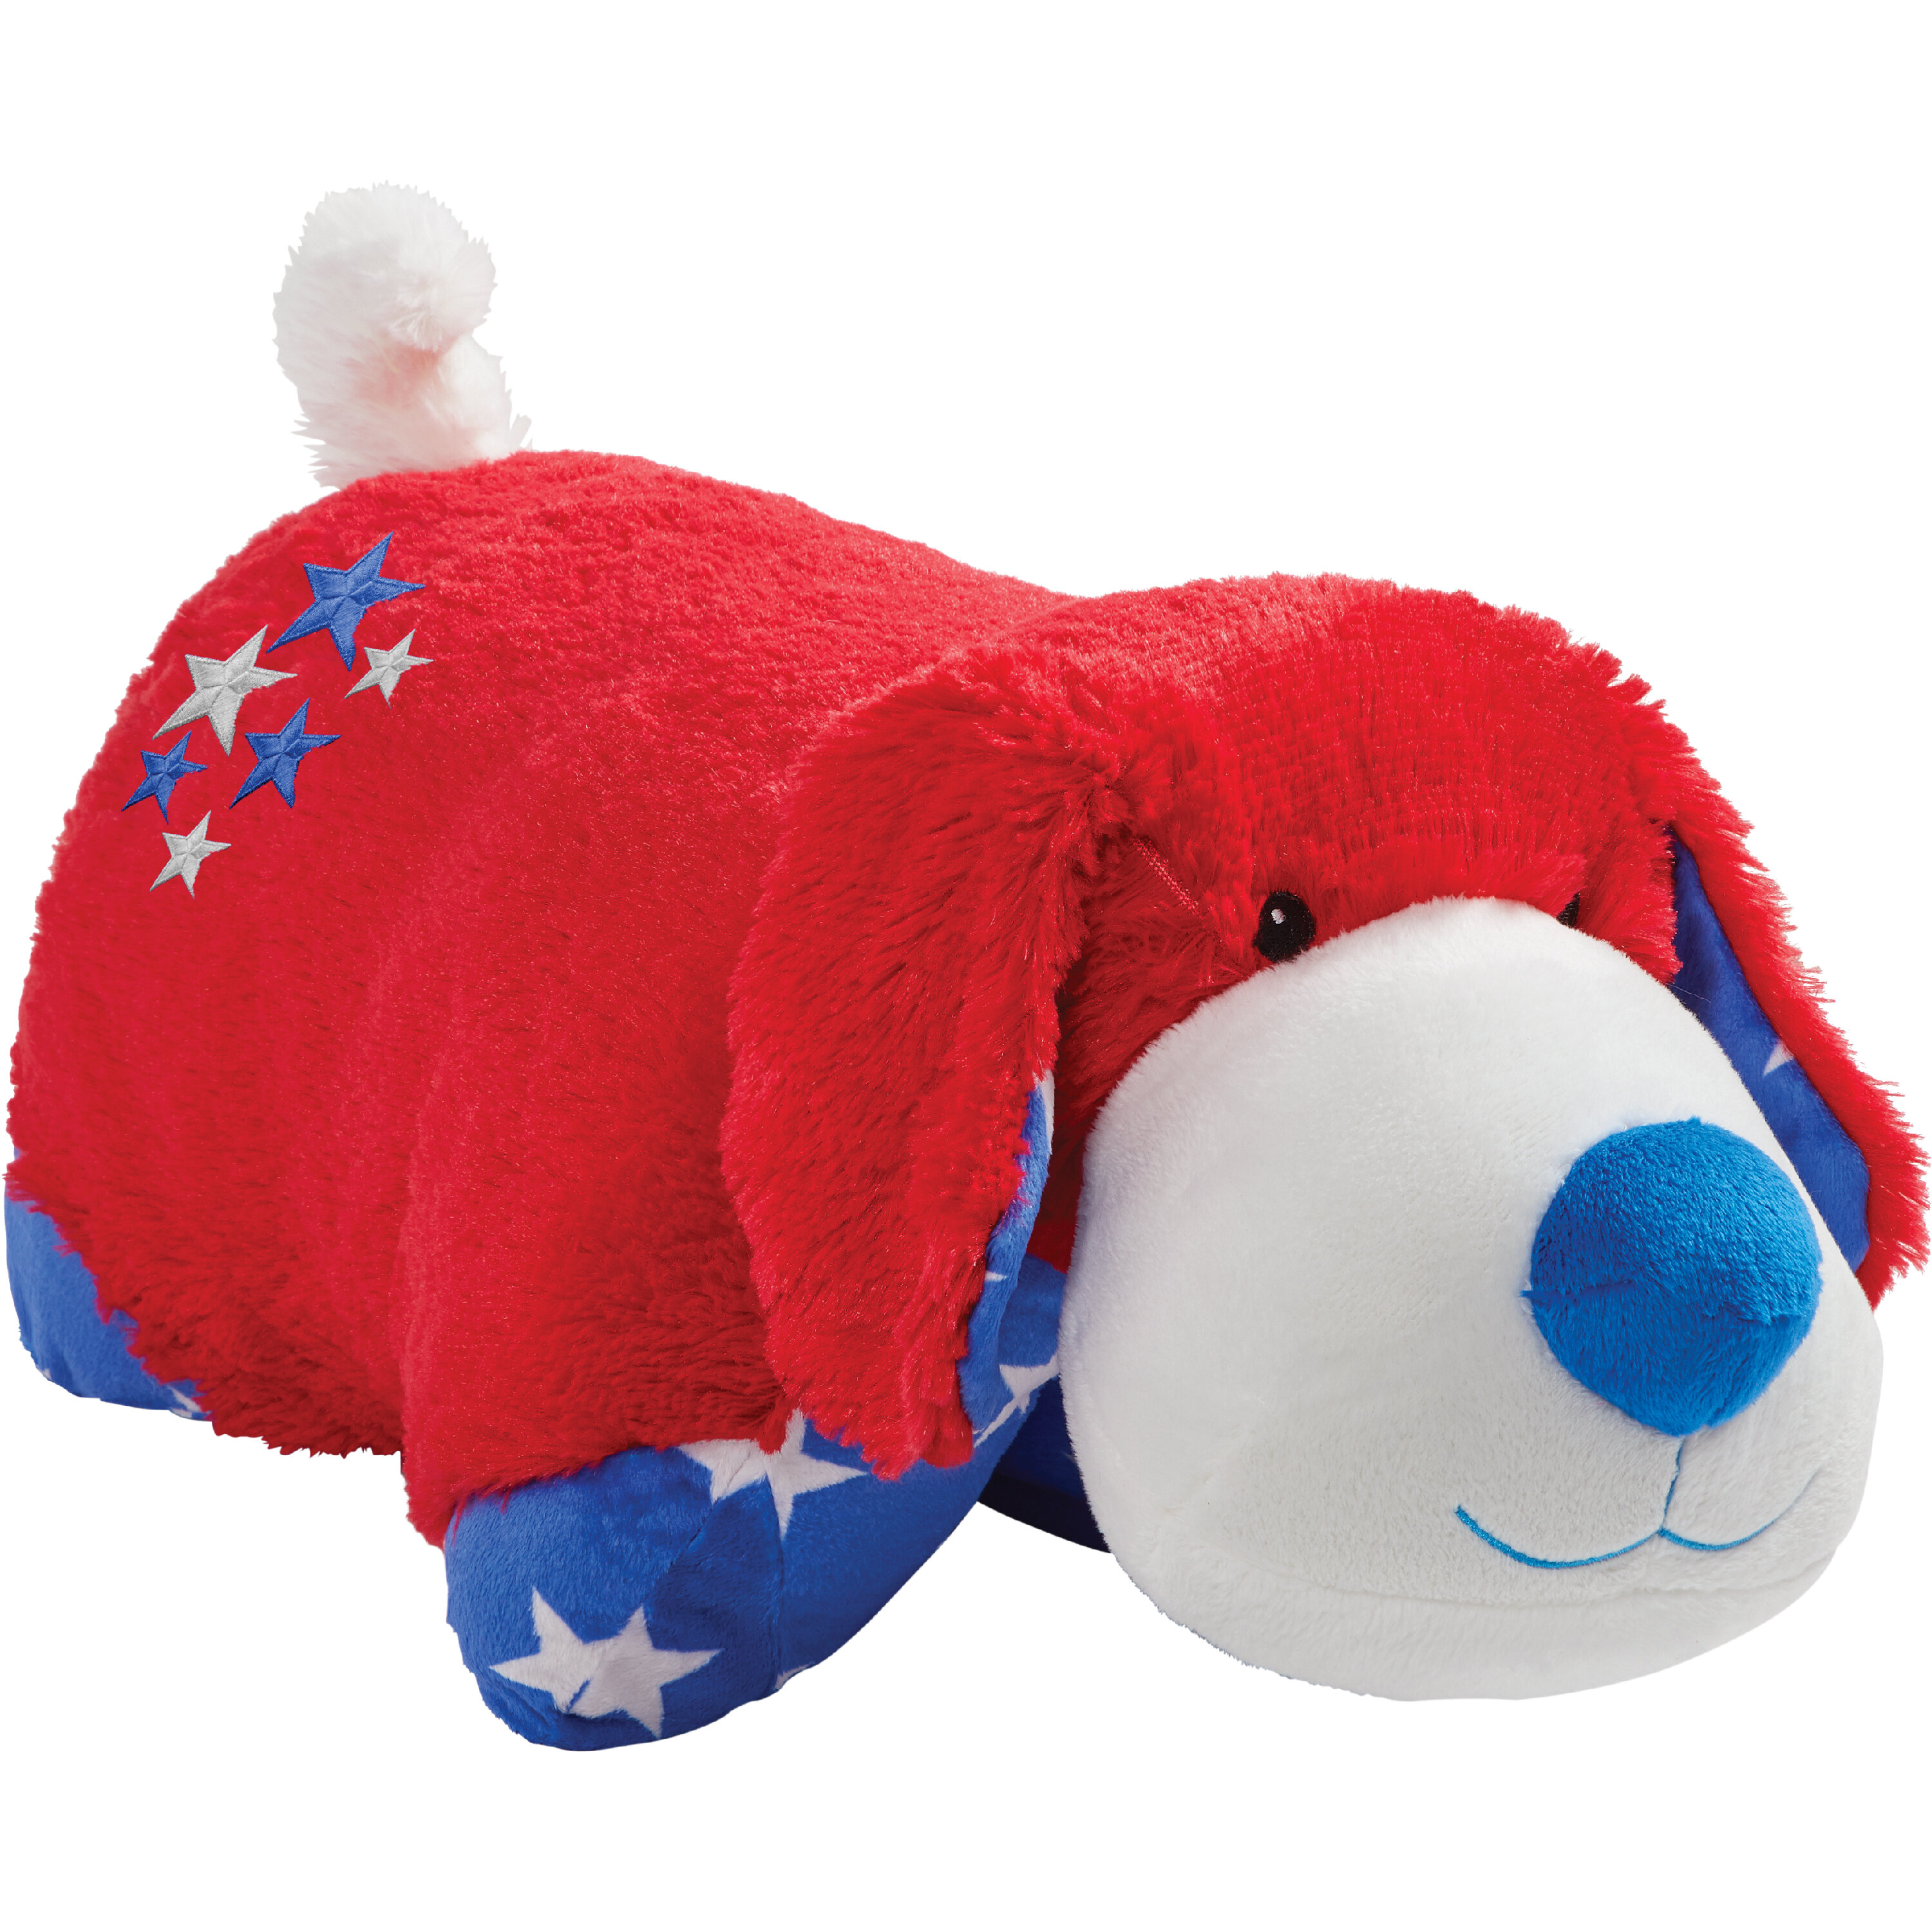 red and white stuffed dog